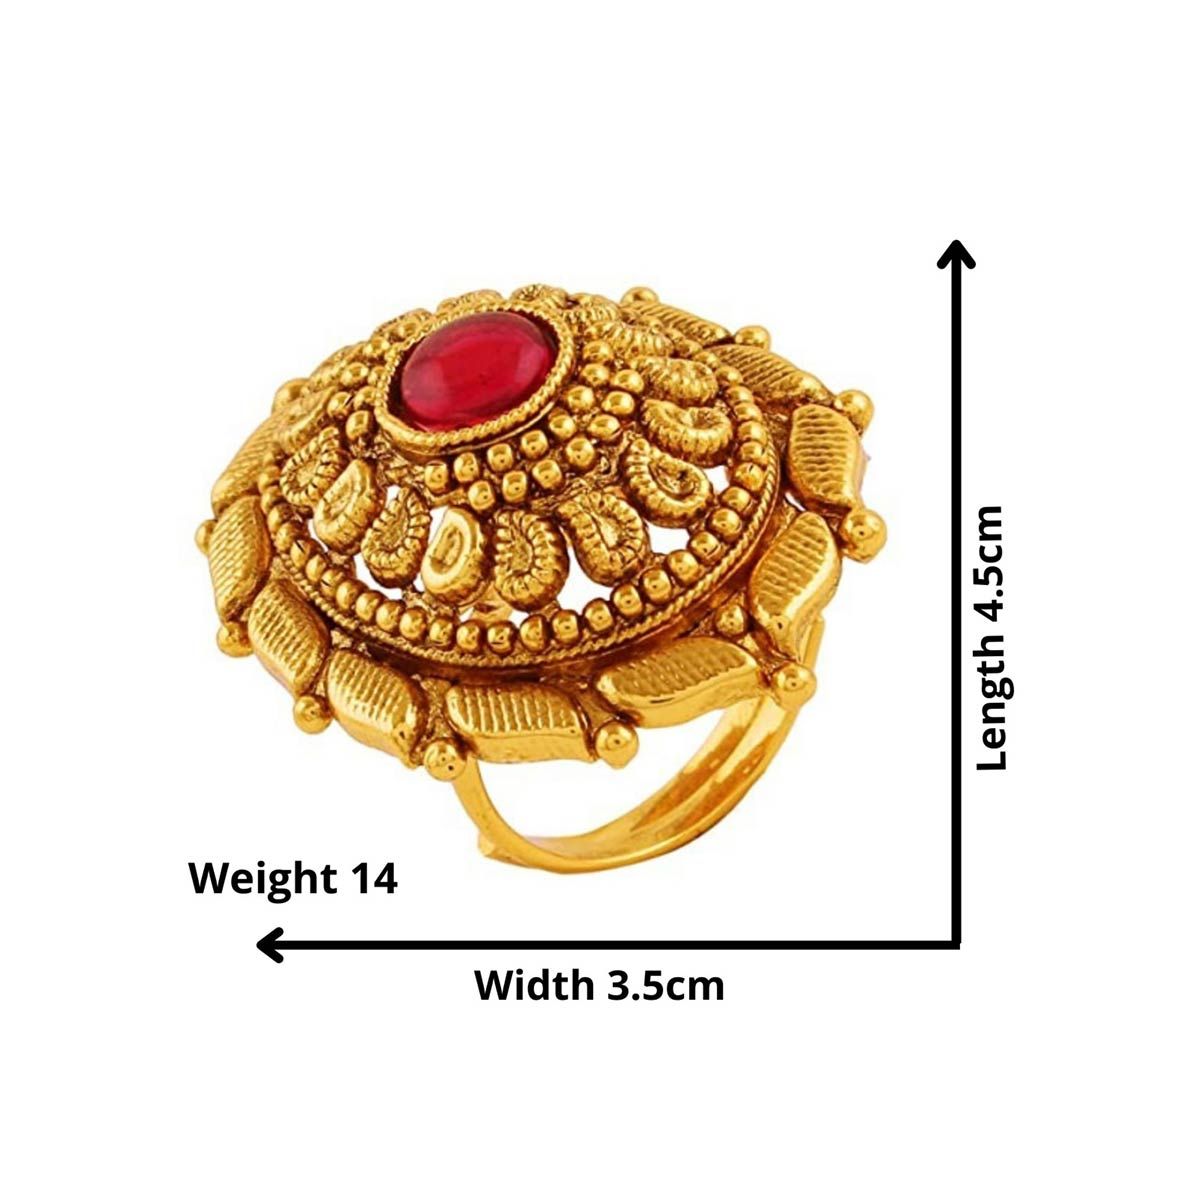 Manufacturer of 916 gold fancy gent's ring | Jewelxy - 166694